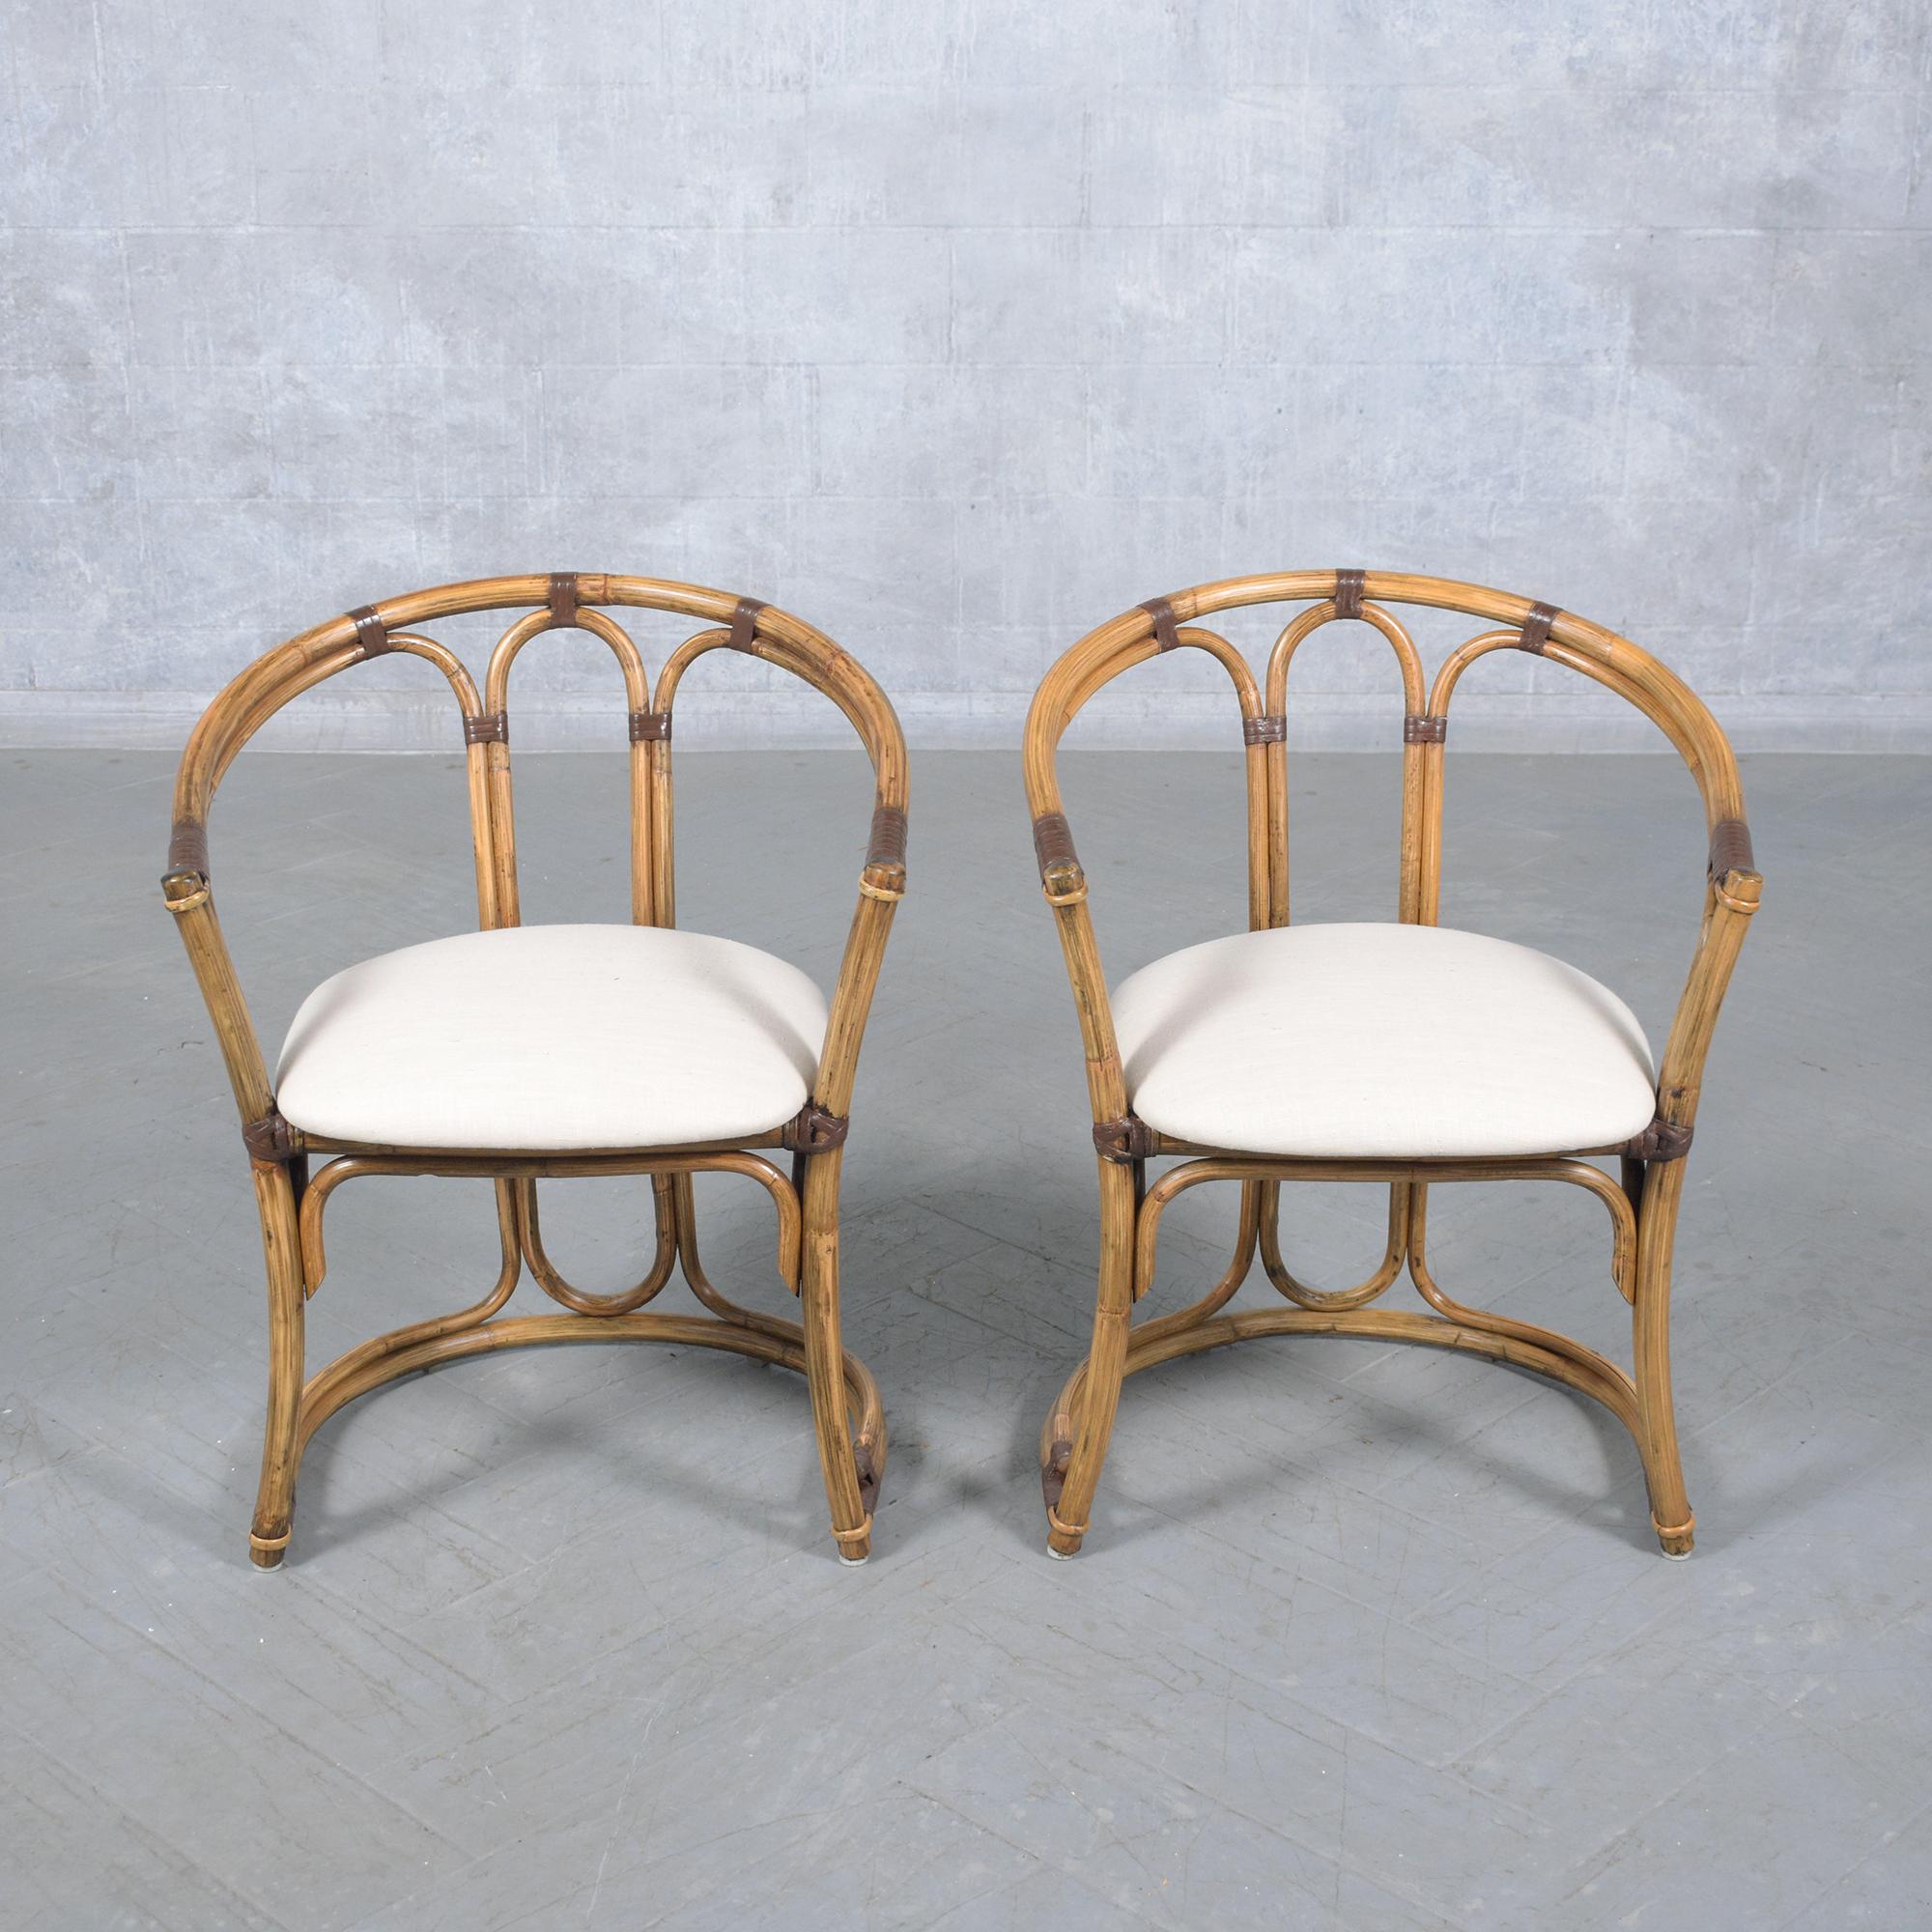 Restored Vintage Bamboo Barrel Armchairs - Set of Four In Good Condition For Sale In Los Angeles, CA